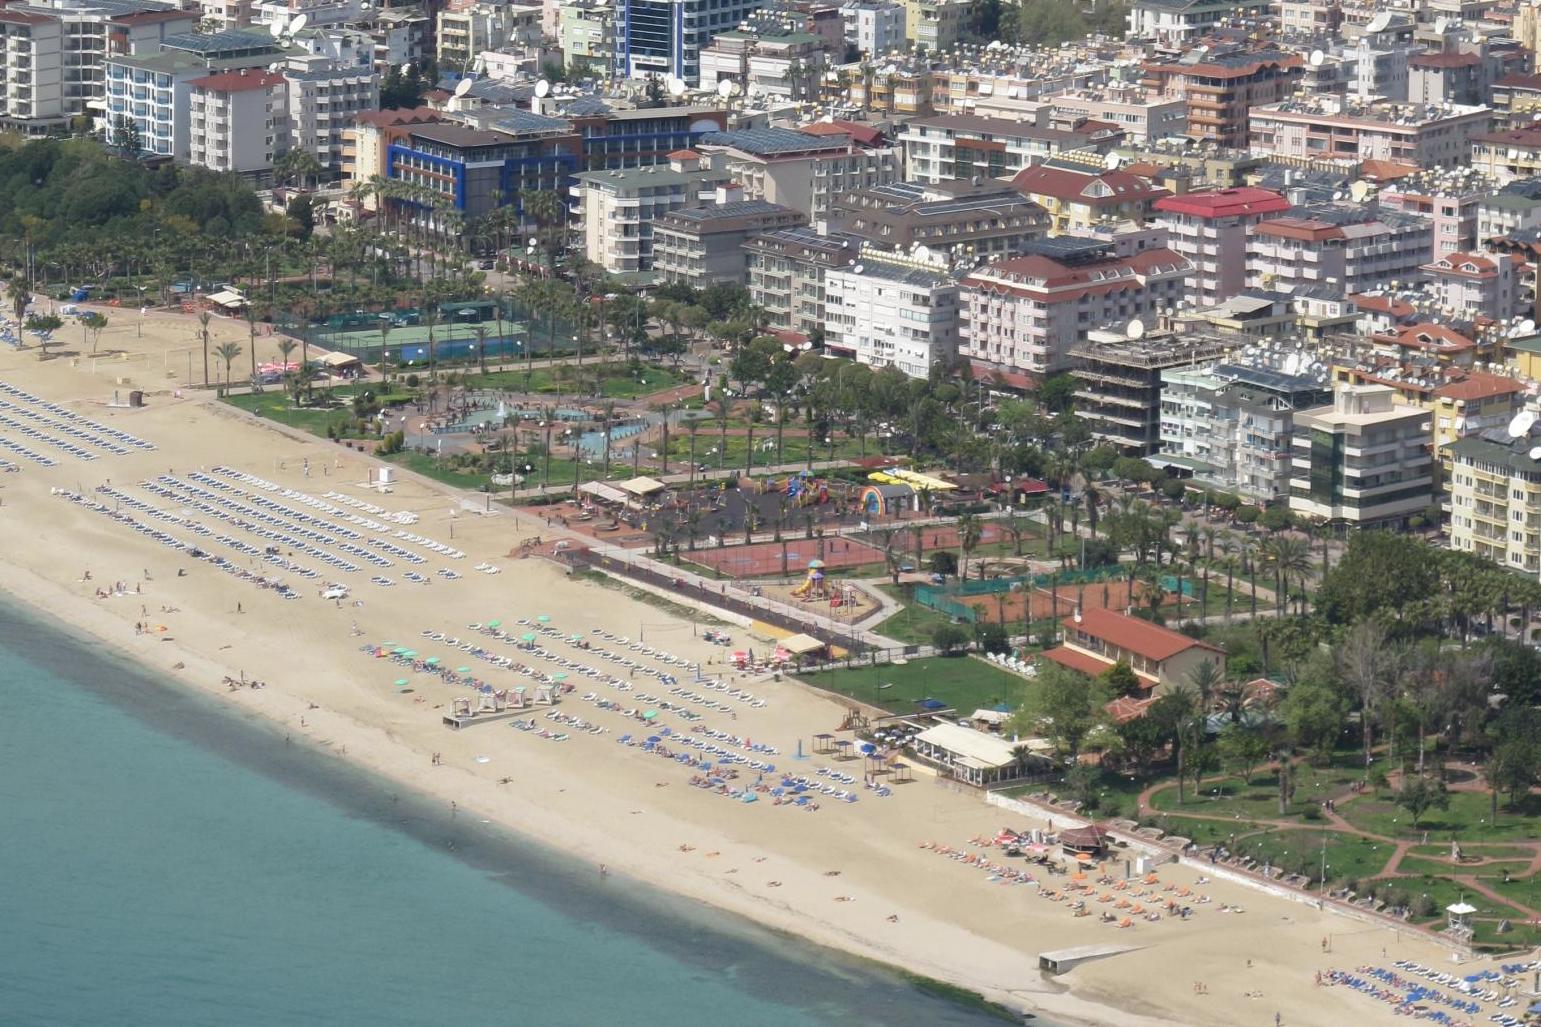 East coast: bookings for the Eastern Mediterranean, such as Alanya in Turkey, are up for 2019